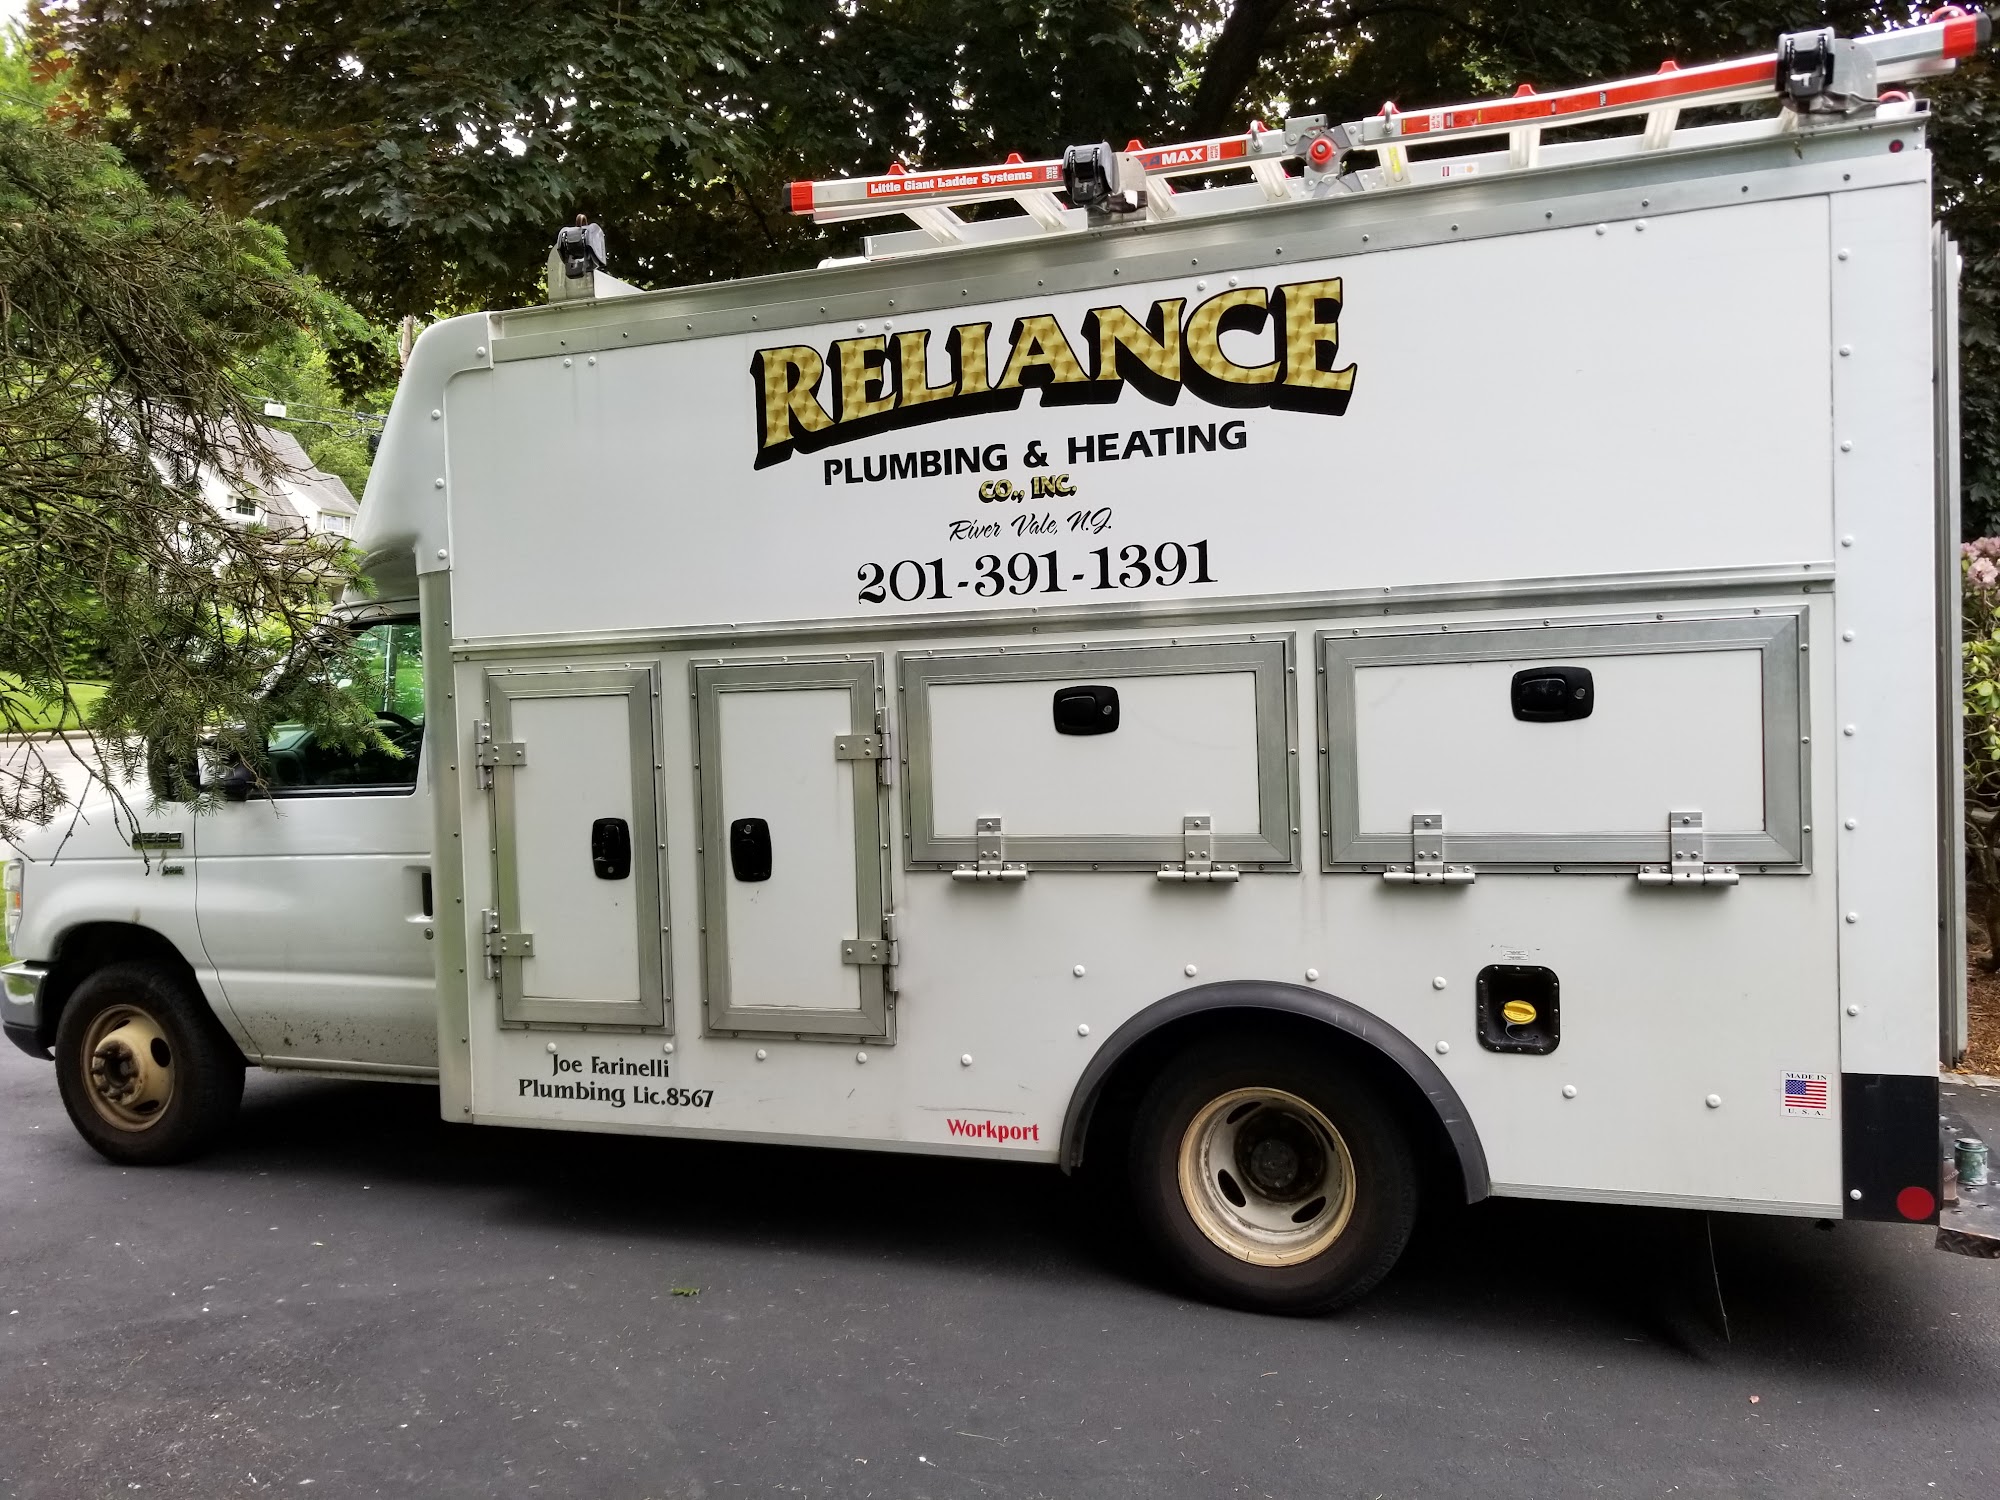 Reliance Plumbing and Heating Co., Inc. 564 Wittich Terrace, River Vale New Jersey 07675